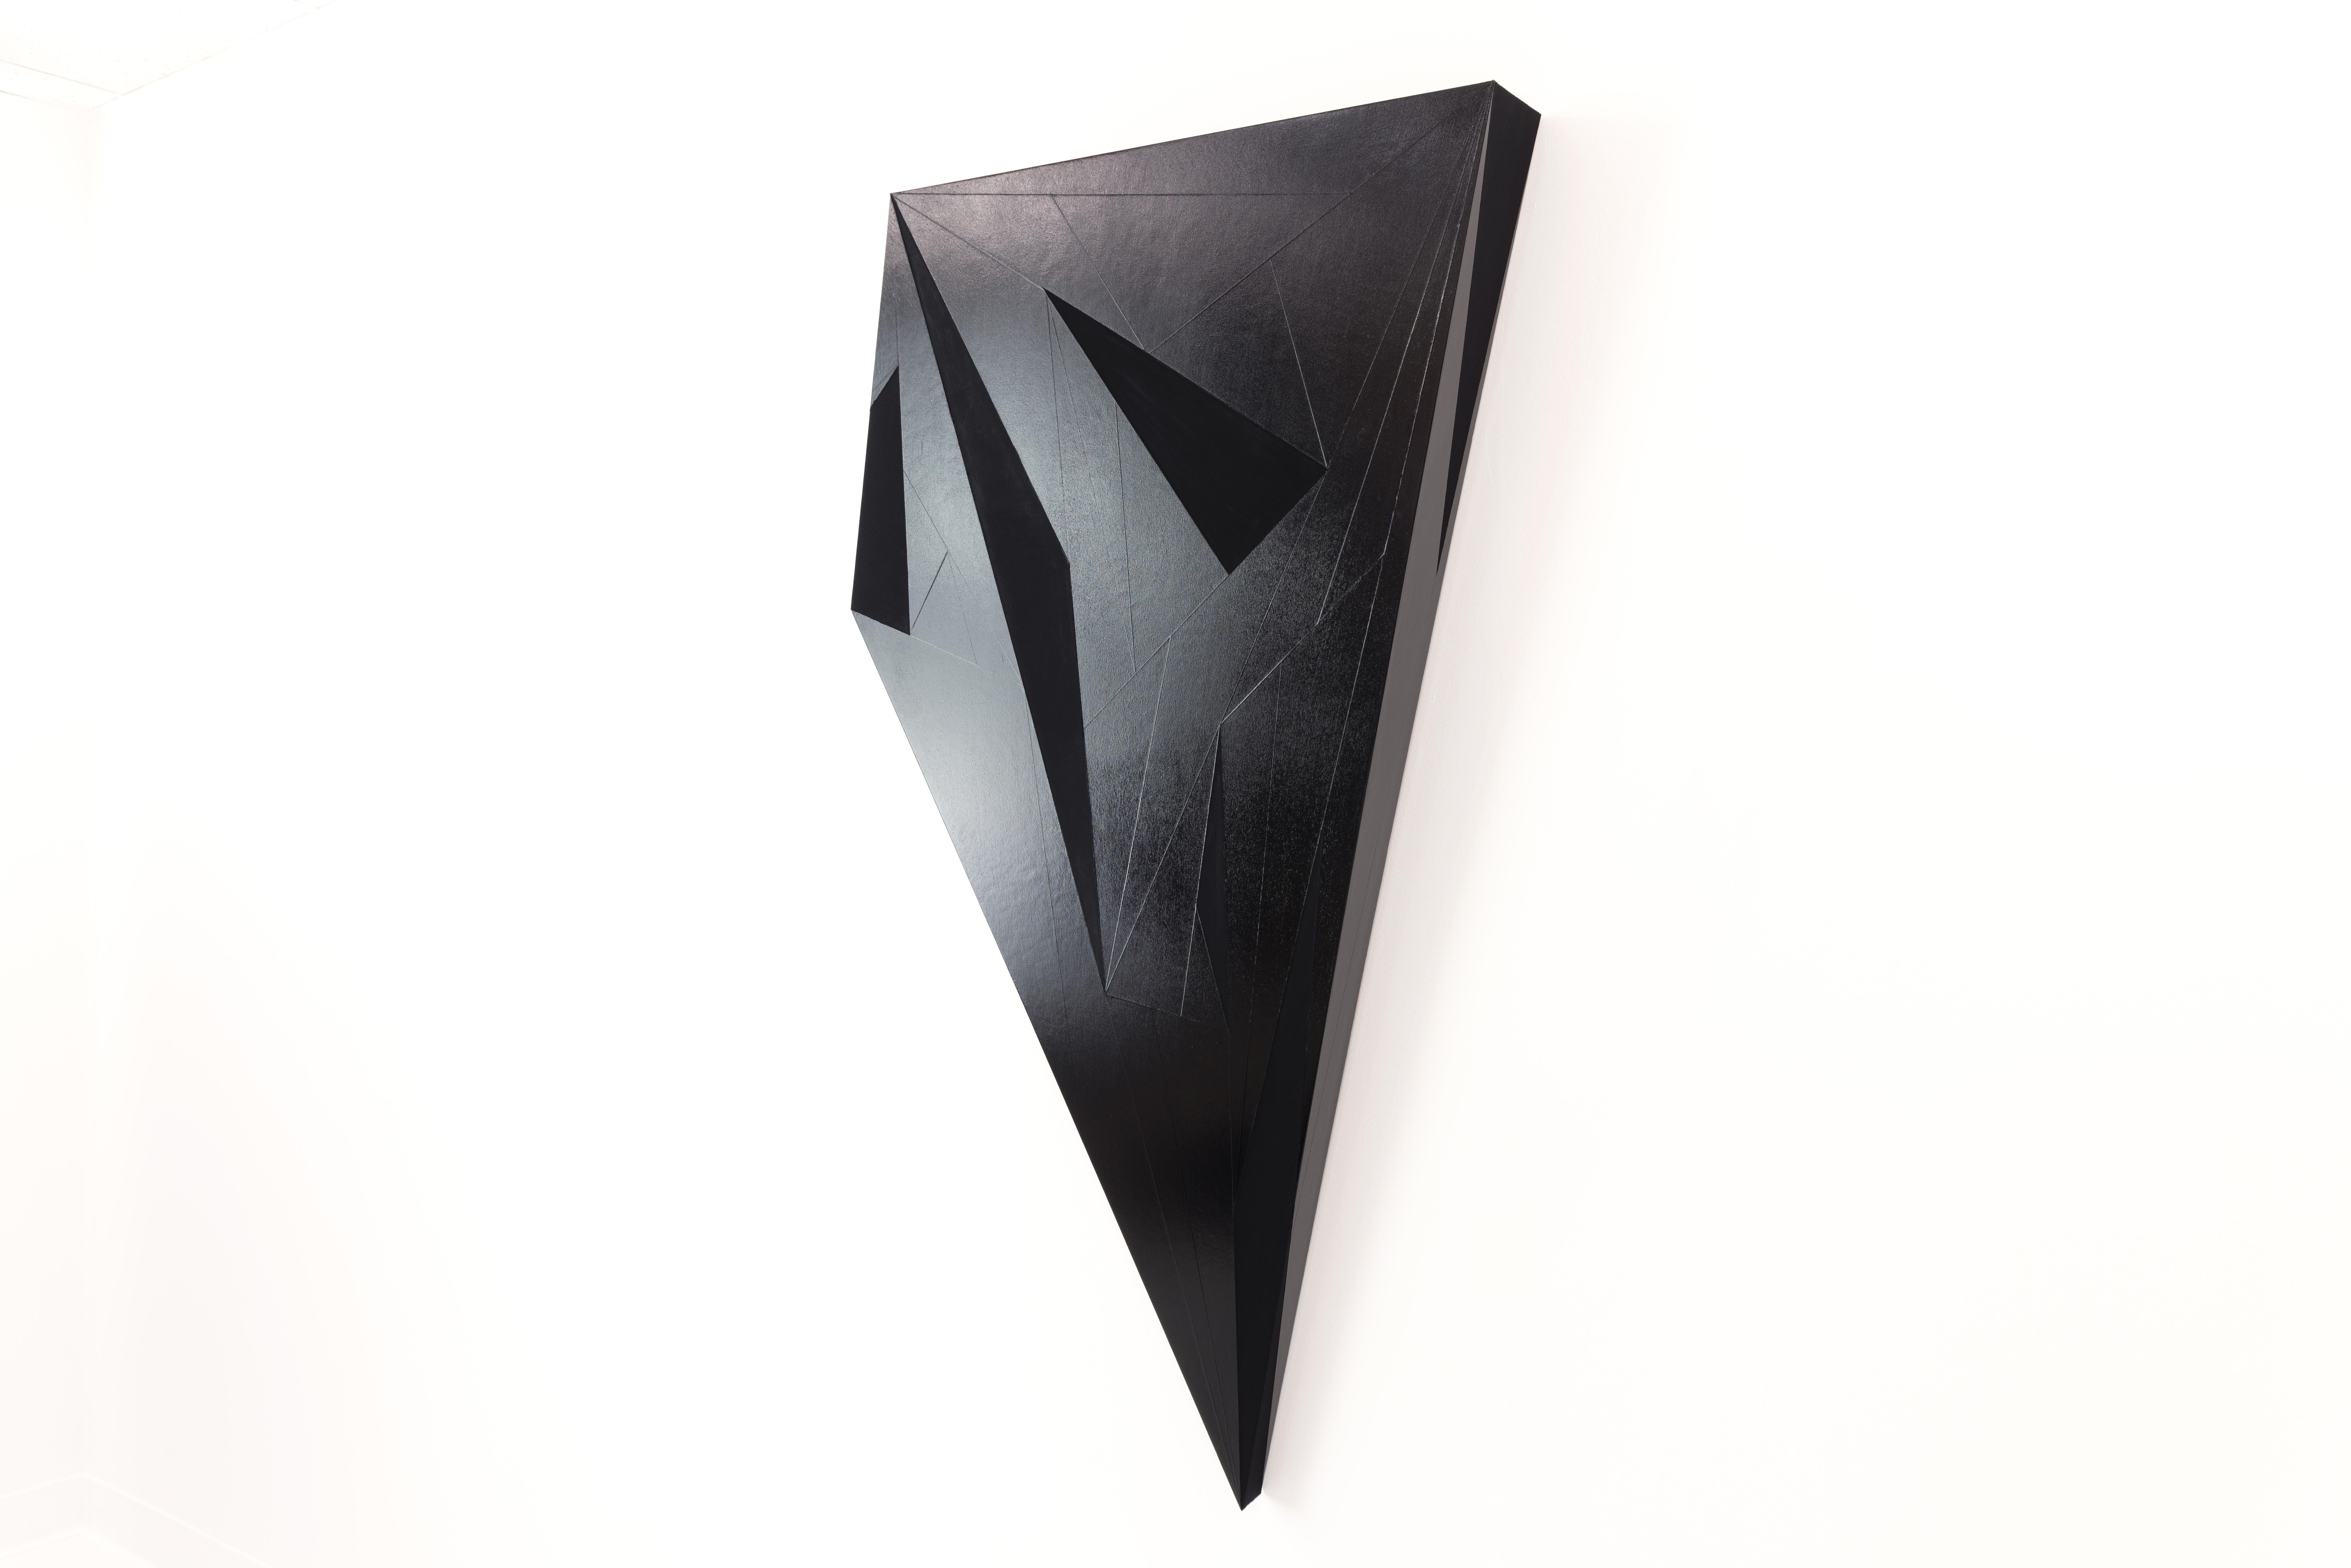 Brandon Woods Abstract Sculpture - VADER - Geometric Wall Hanging Sculpture/Painting in Black 3.0 Acrylic on Panel